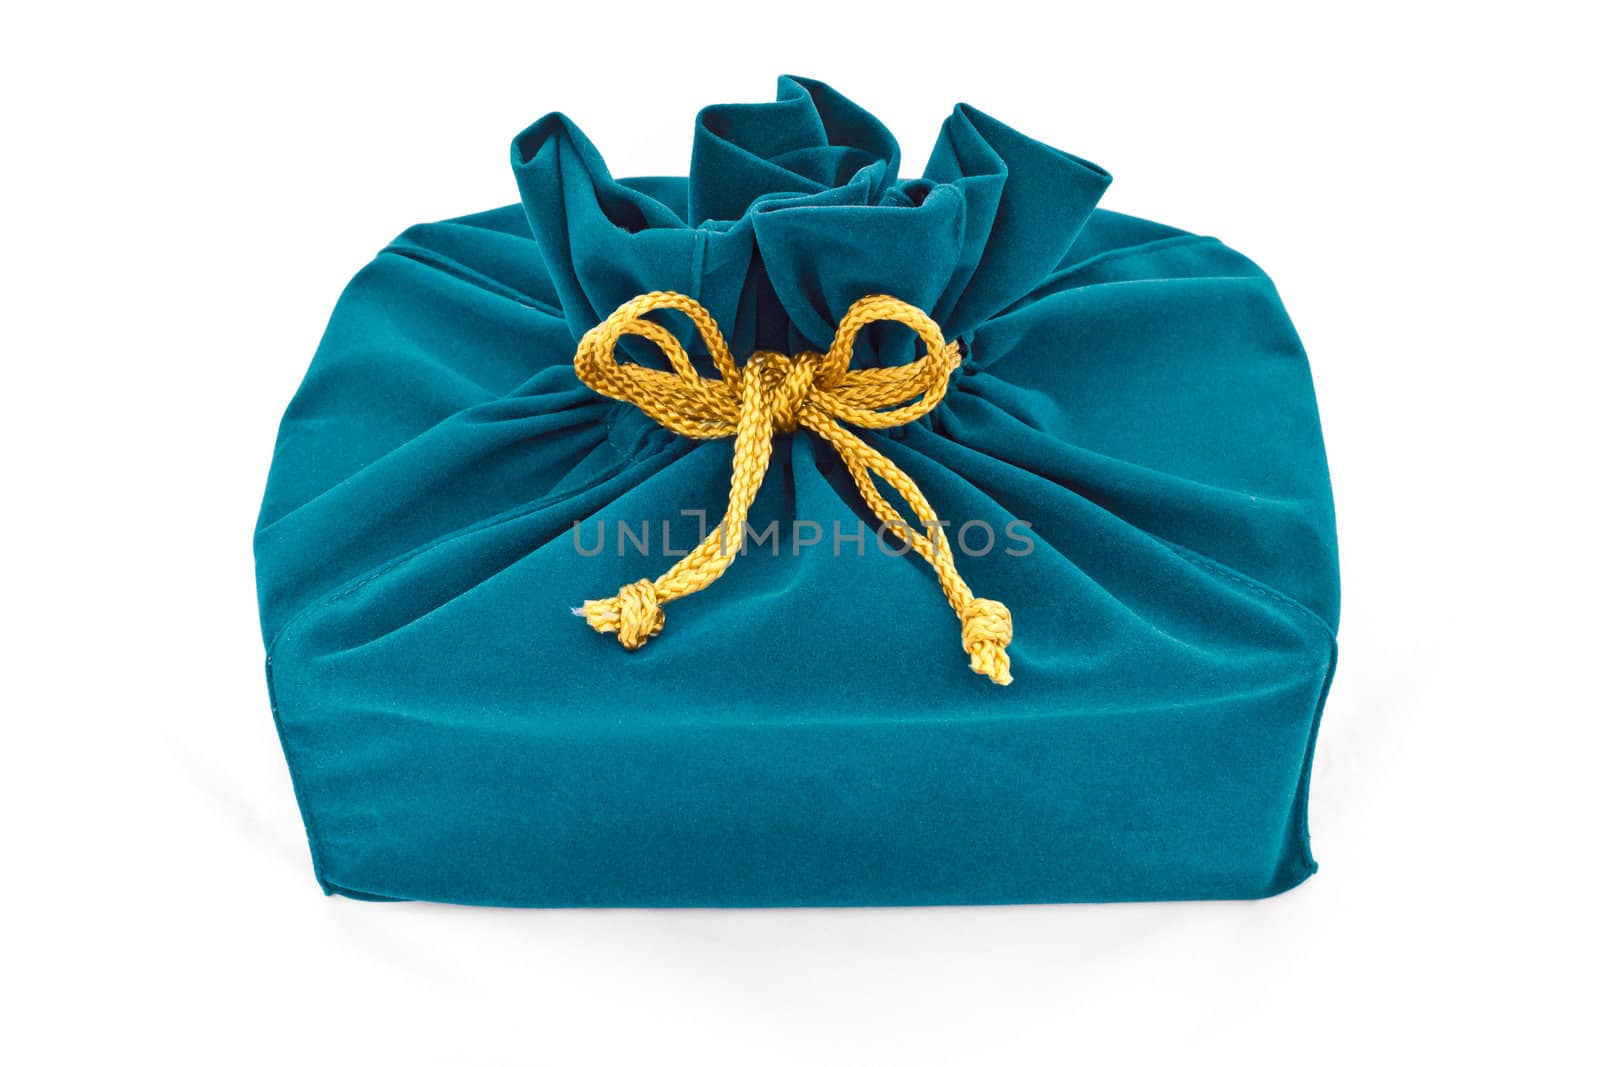 blue fabric gift bag isolated